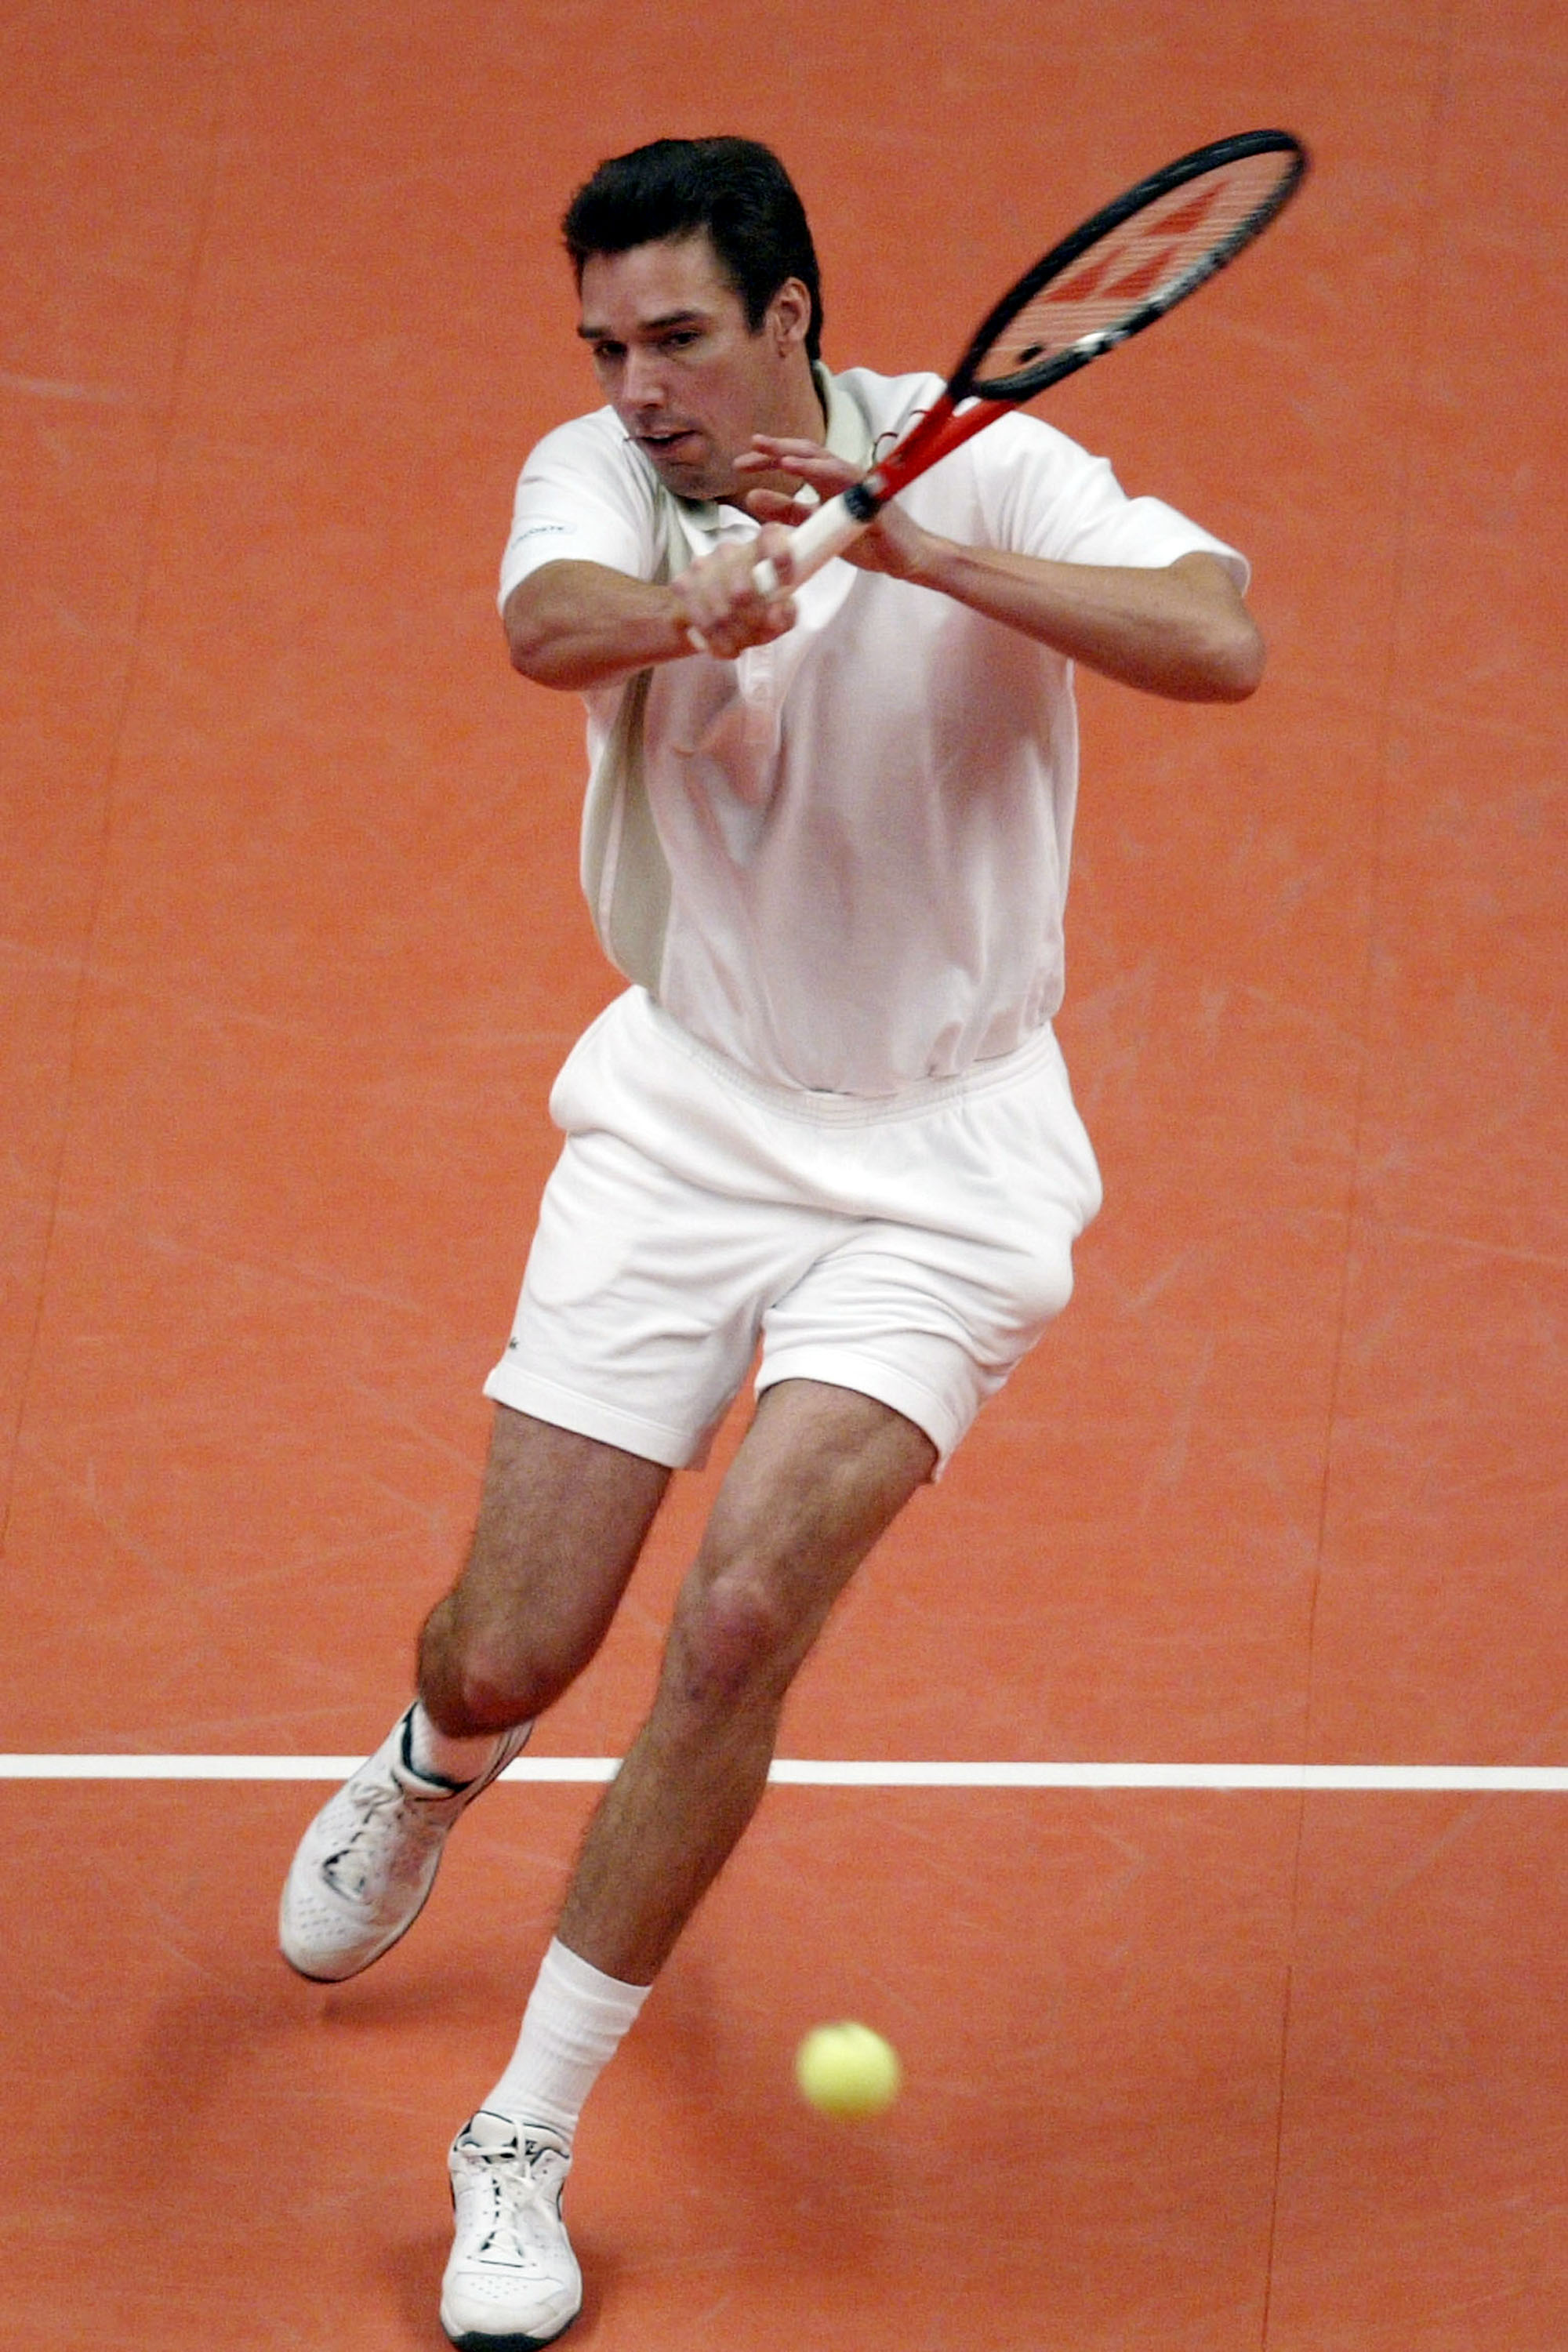 LONDON - DECEMBER 4:  Michael Stich in action during his match against Boris Becker during the Honda Challenge 2003 at The Royal Albert Hall on December 4, 2003 in London.  (Photo by Ian Walton/Getty Images)